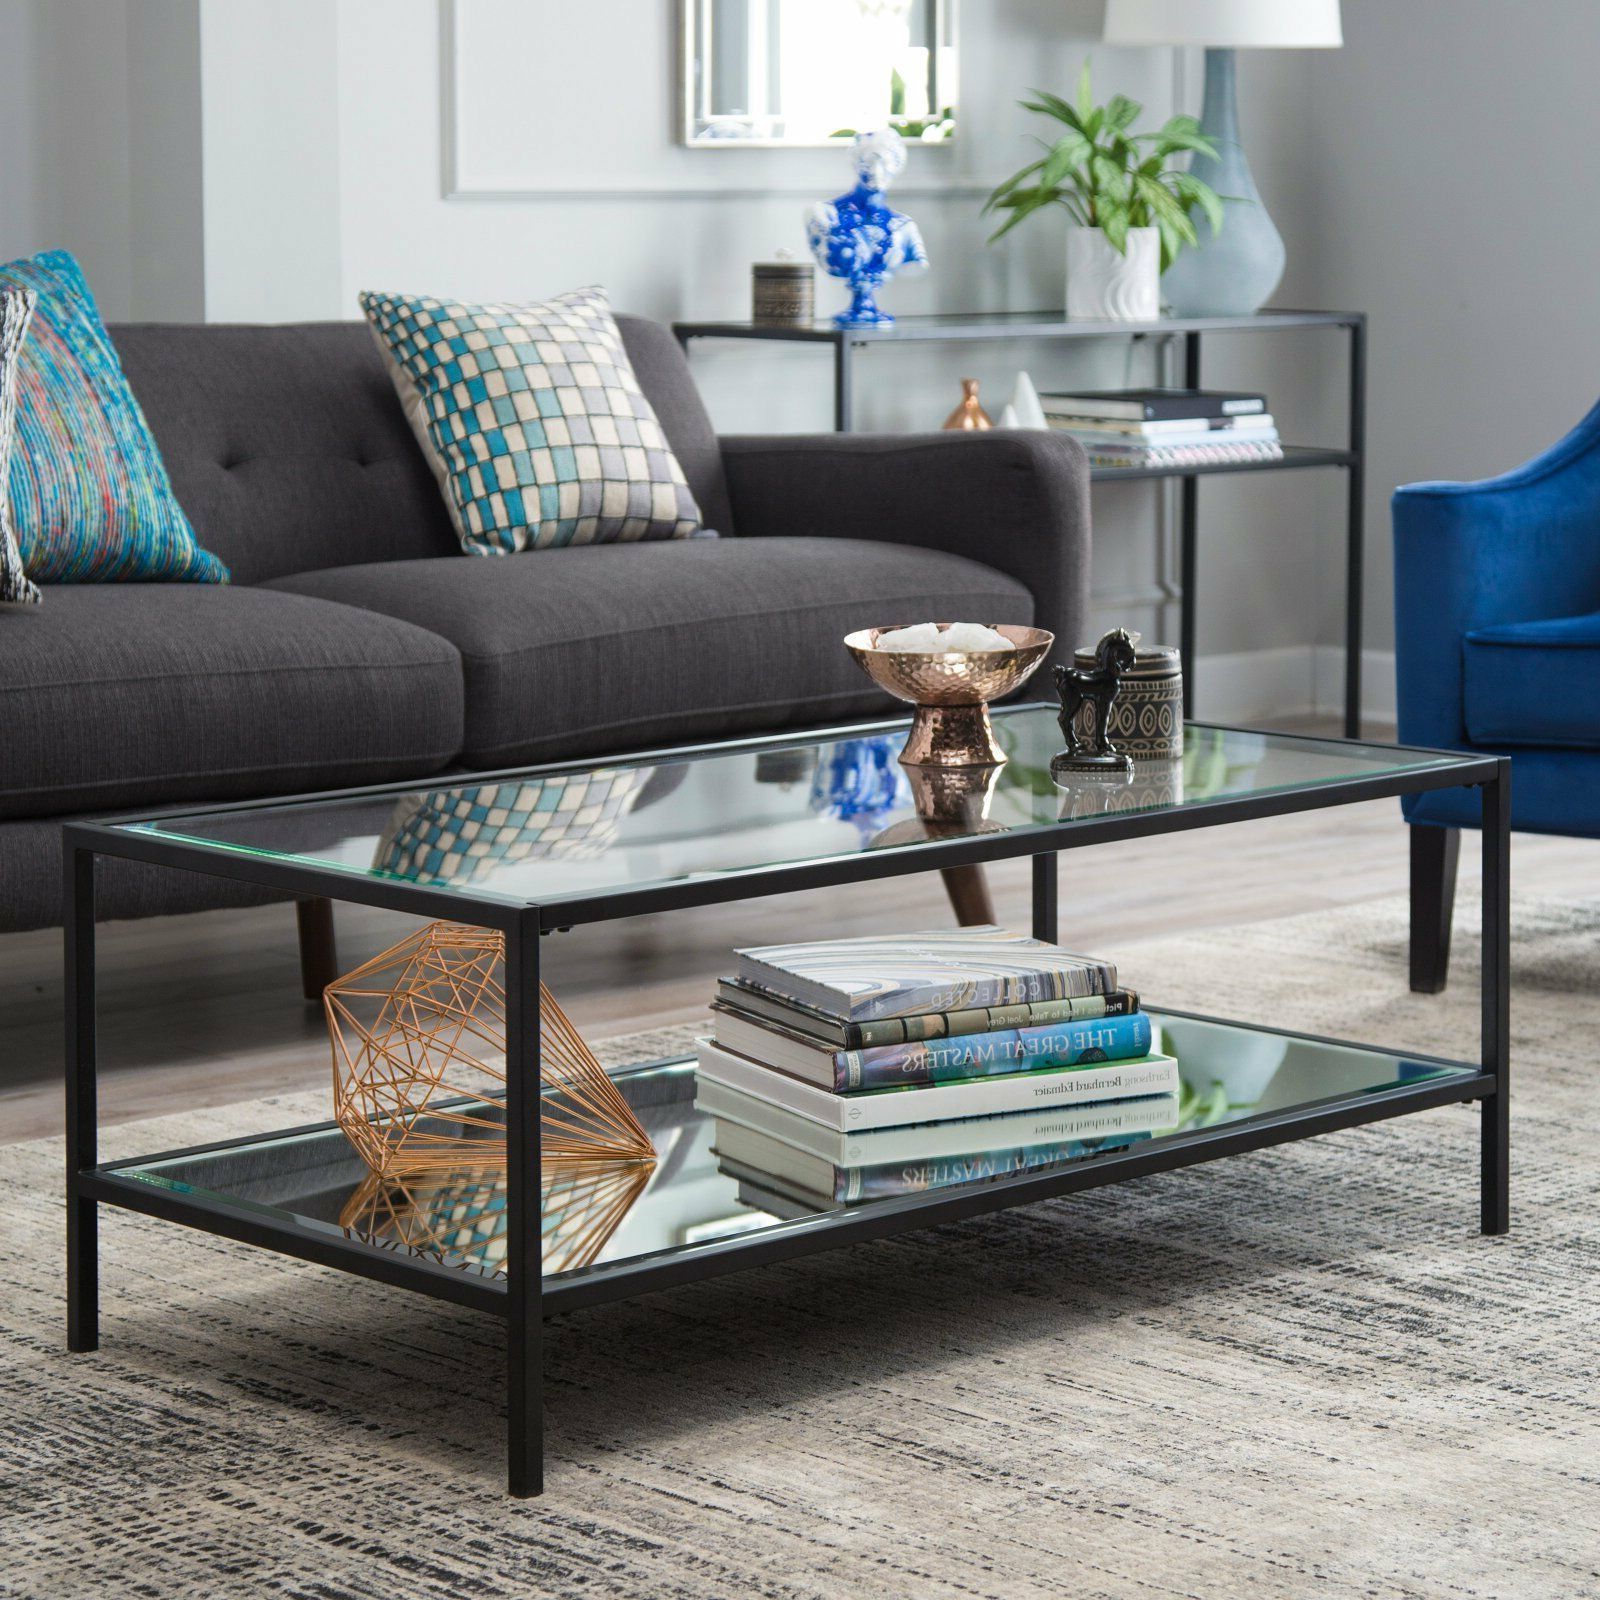 2019 Contemporary Glam Metal Glass Modern Black Coffee Table With Regard To Black Coffee Tables (View 17 of 20)